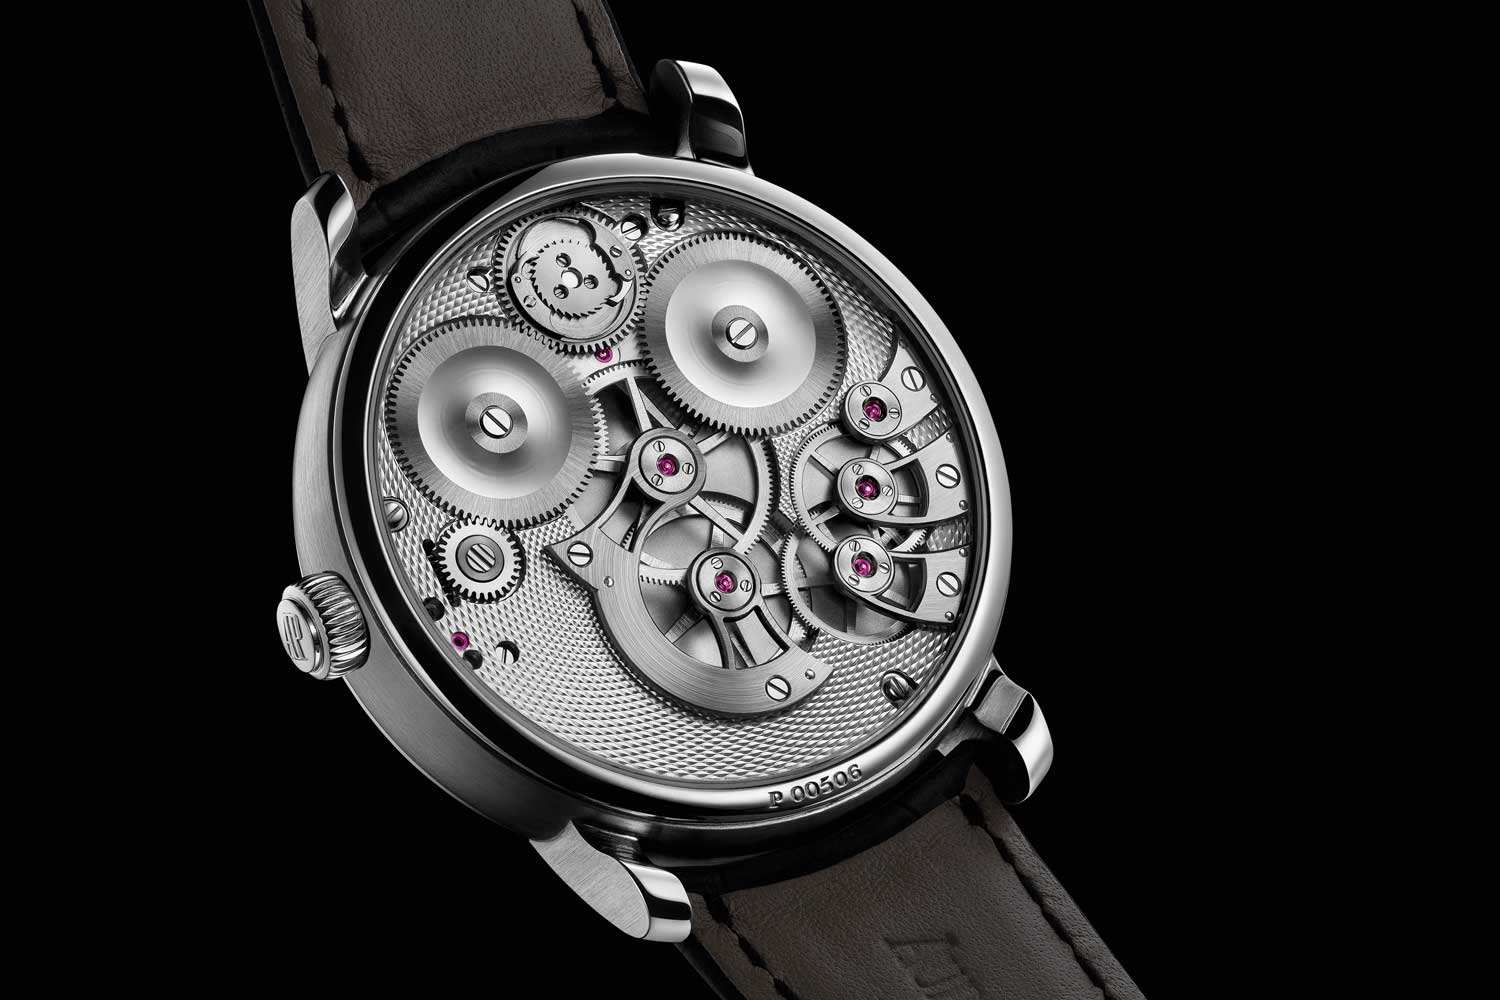 This is accomplished with the highly efficient, direct-impulse Audemars Piguet escapement as well as double barrels installed in a parallel configuration visible on the caseback